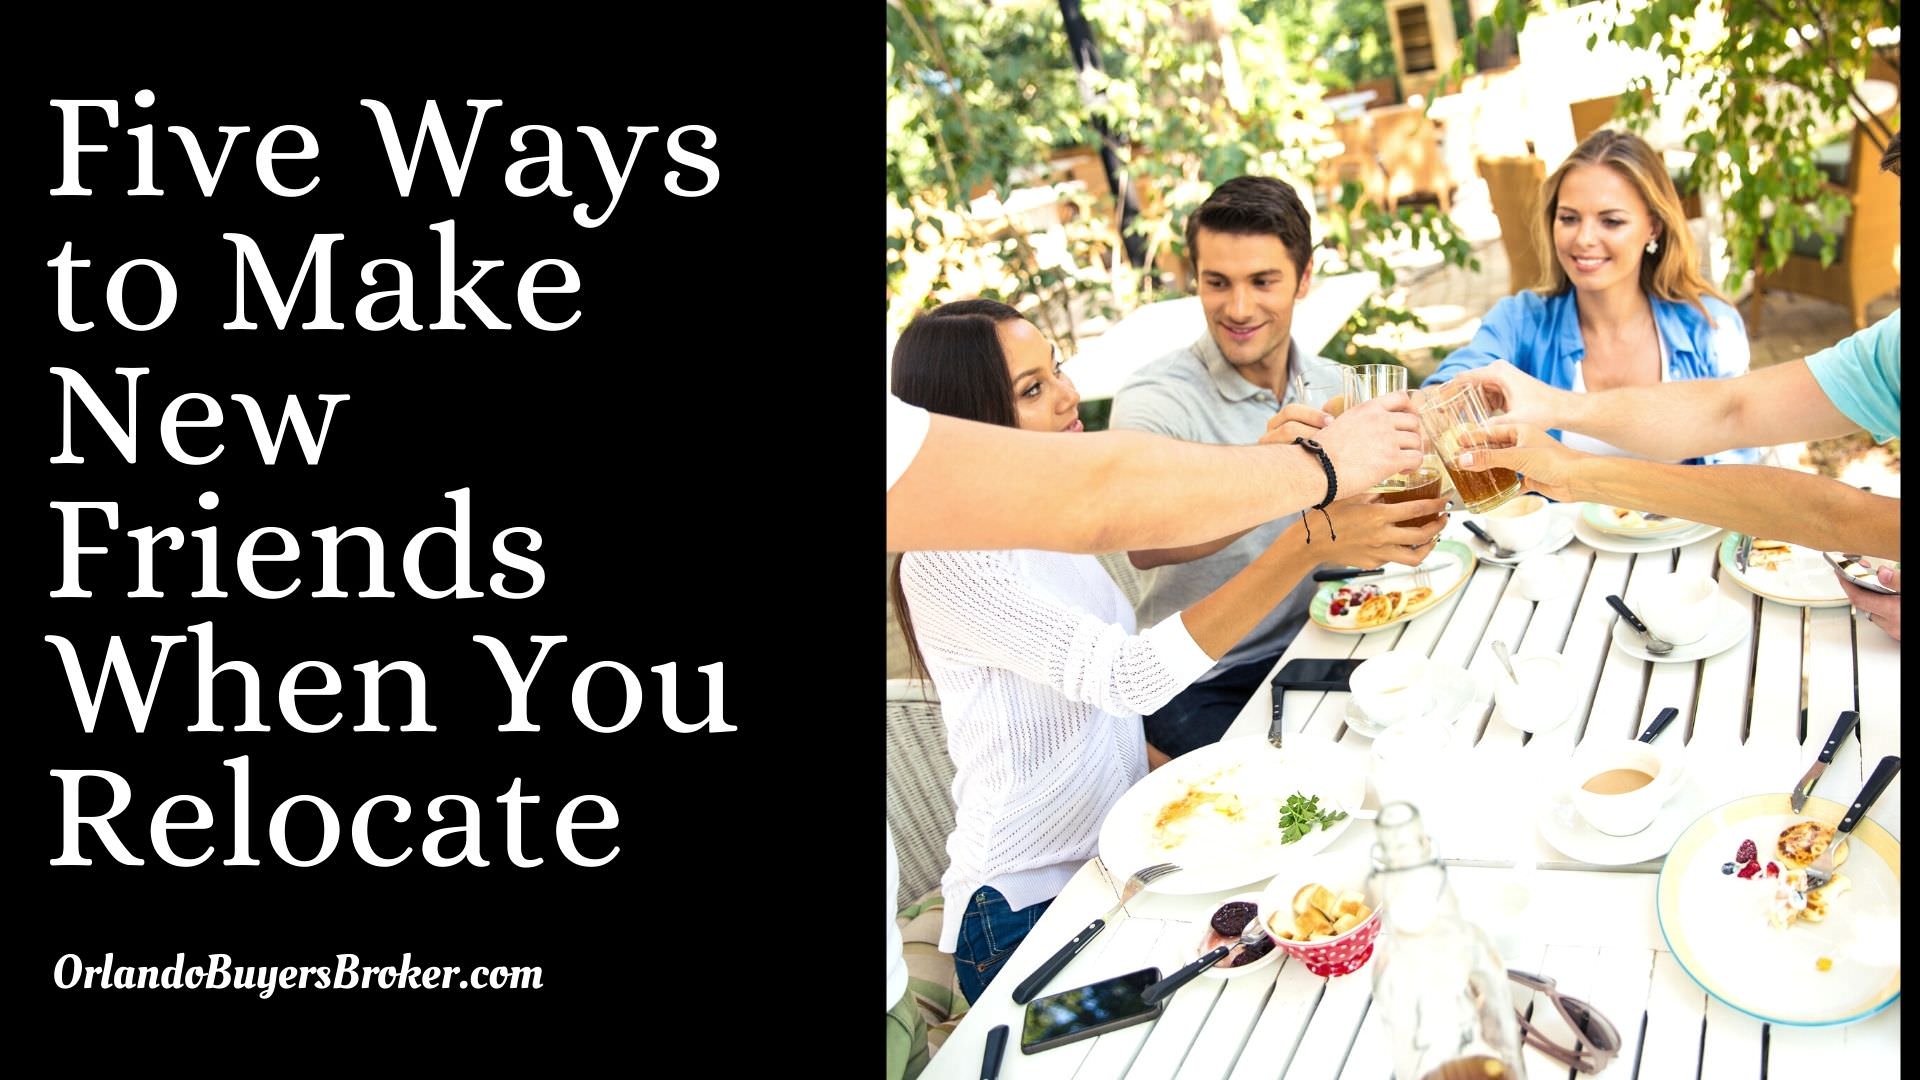 Five Ways to Make New Friends When You Relocate